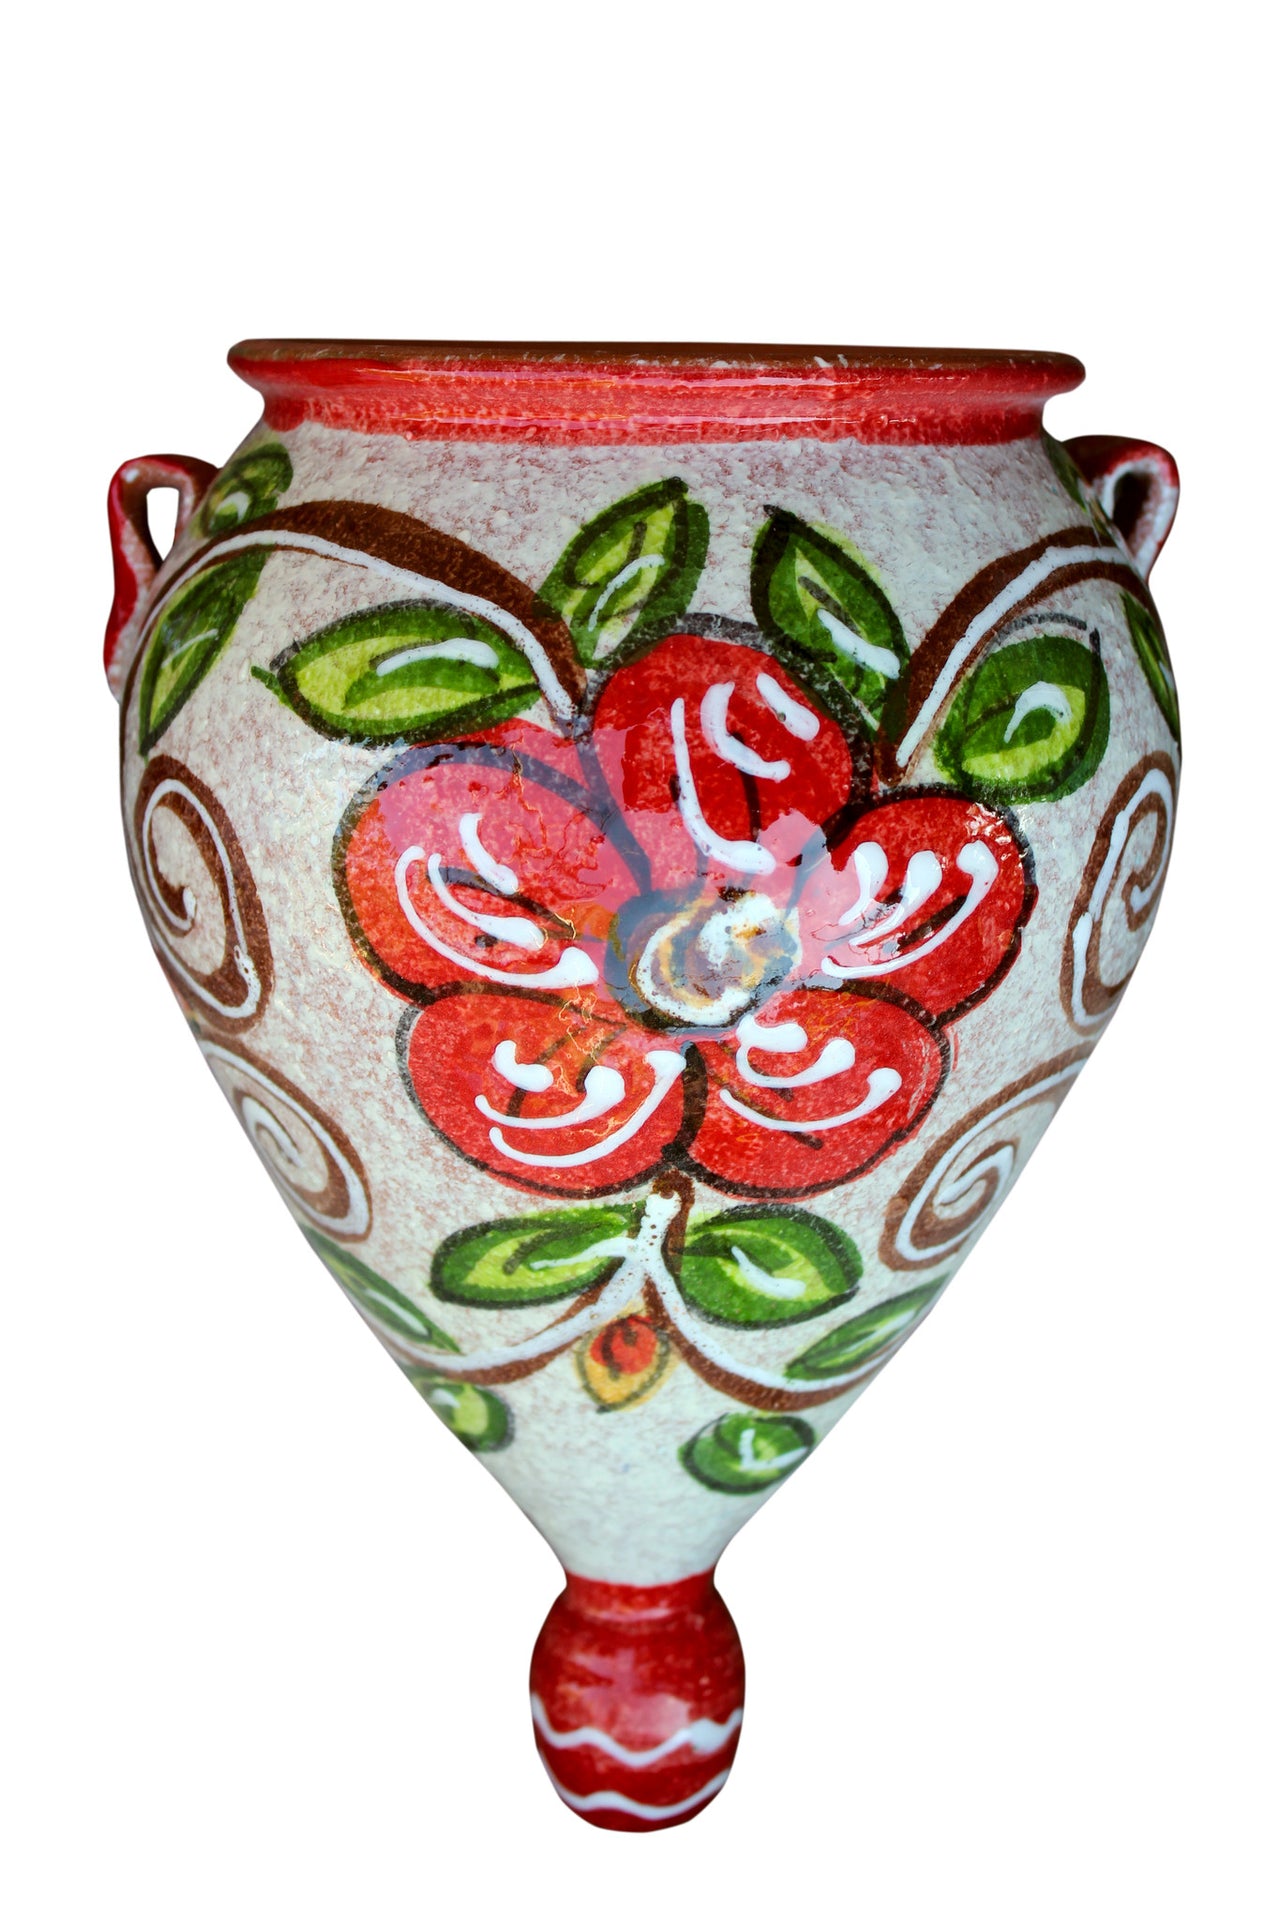 Wall Planter - Spanish Orza (Spanish Rose) - Hand Painted in Spain